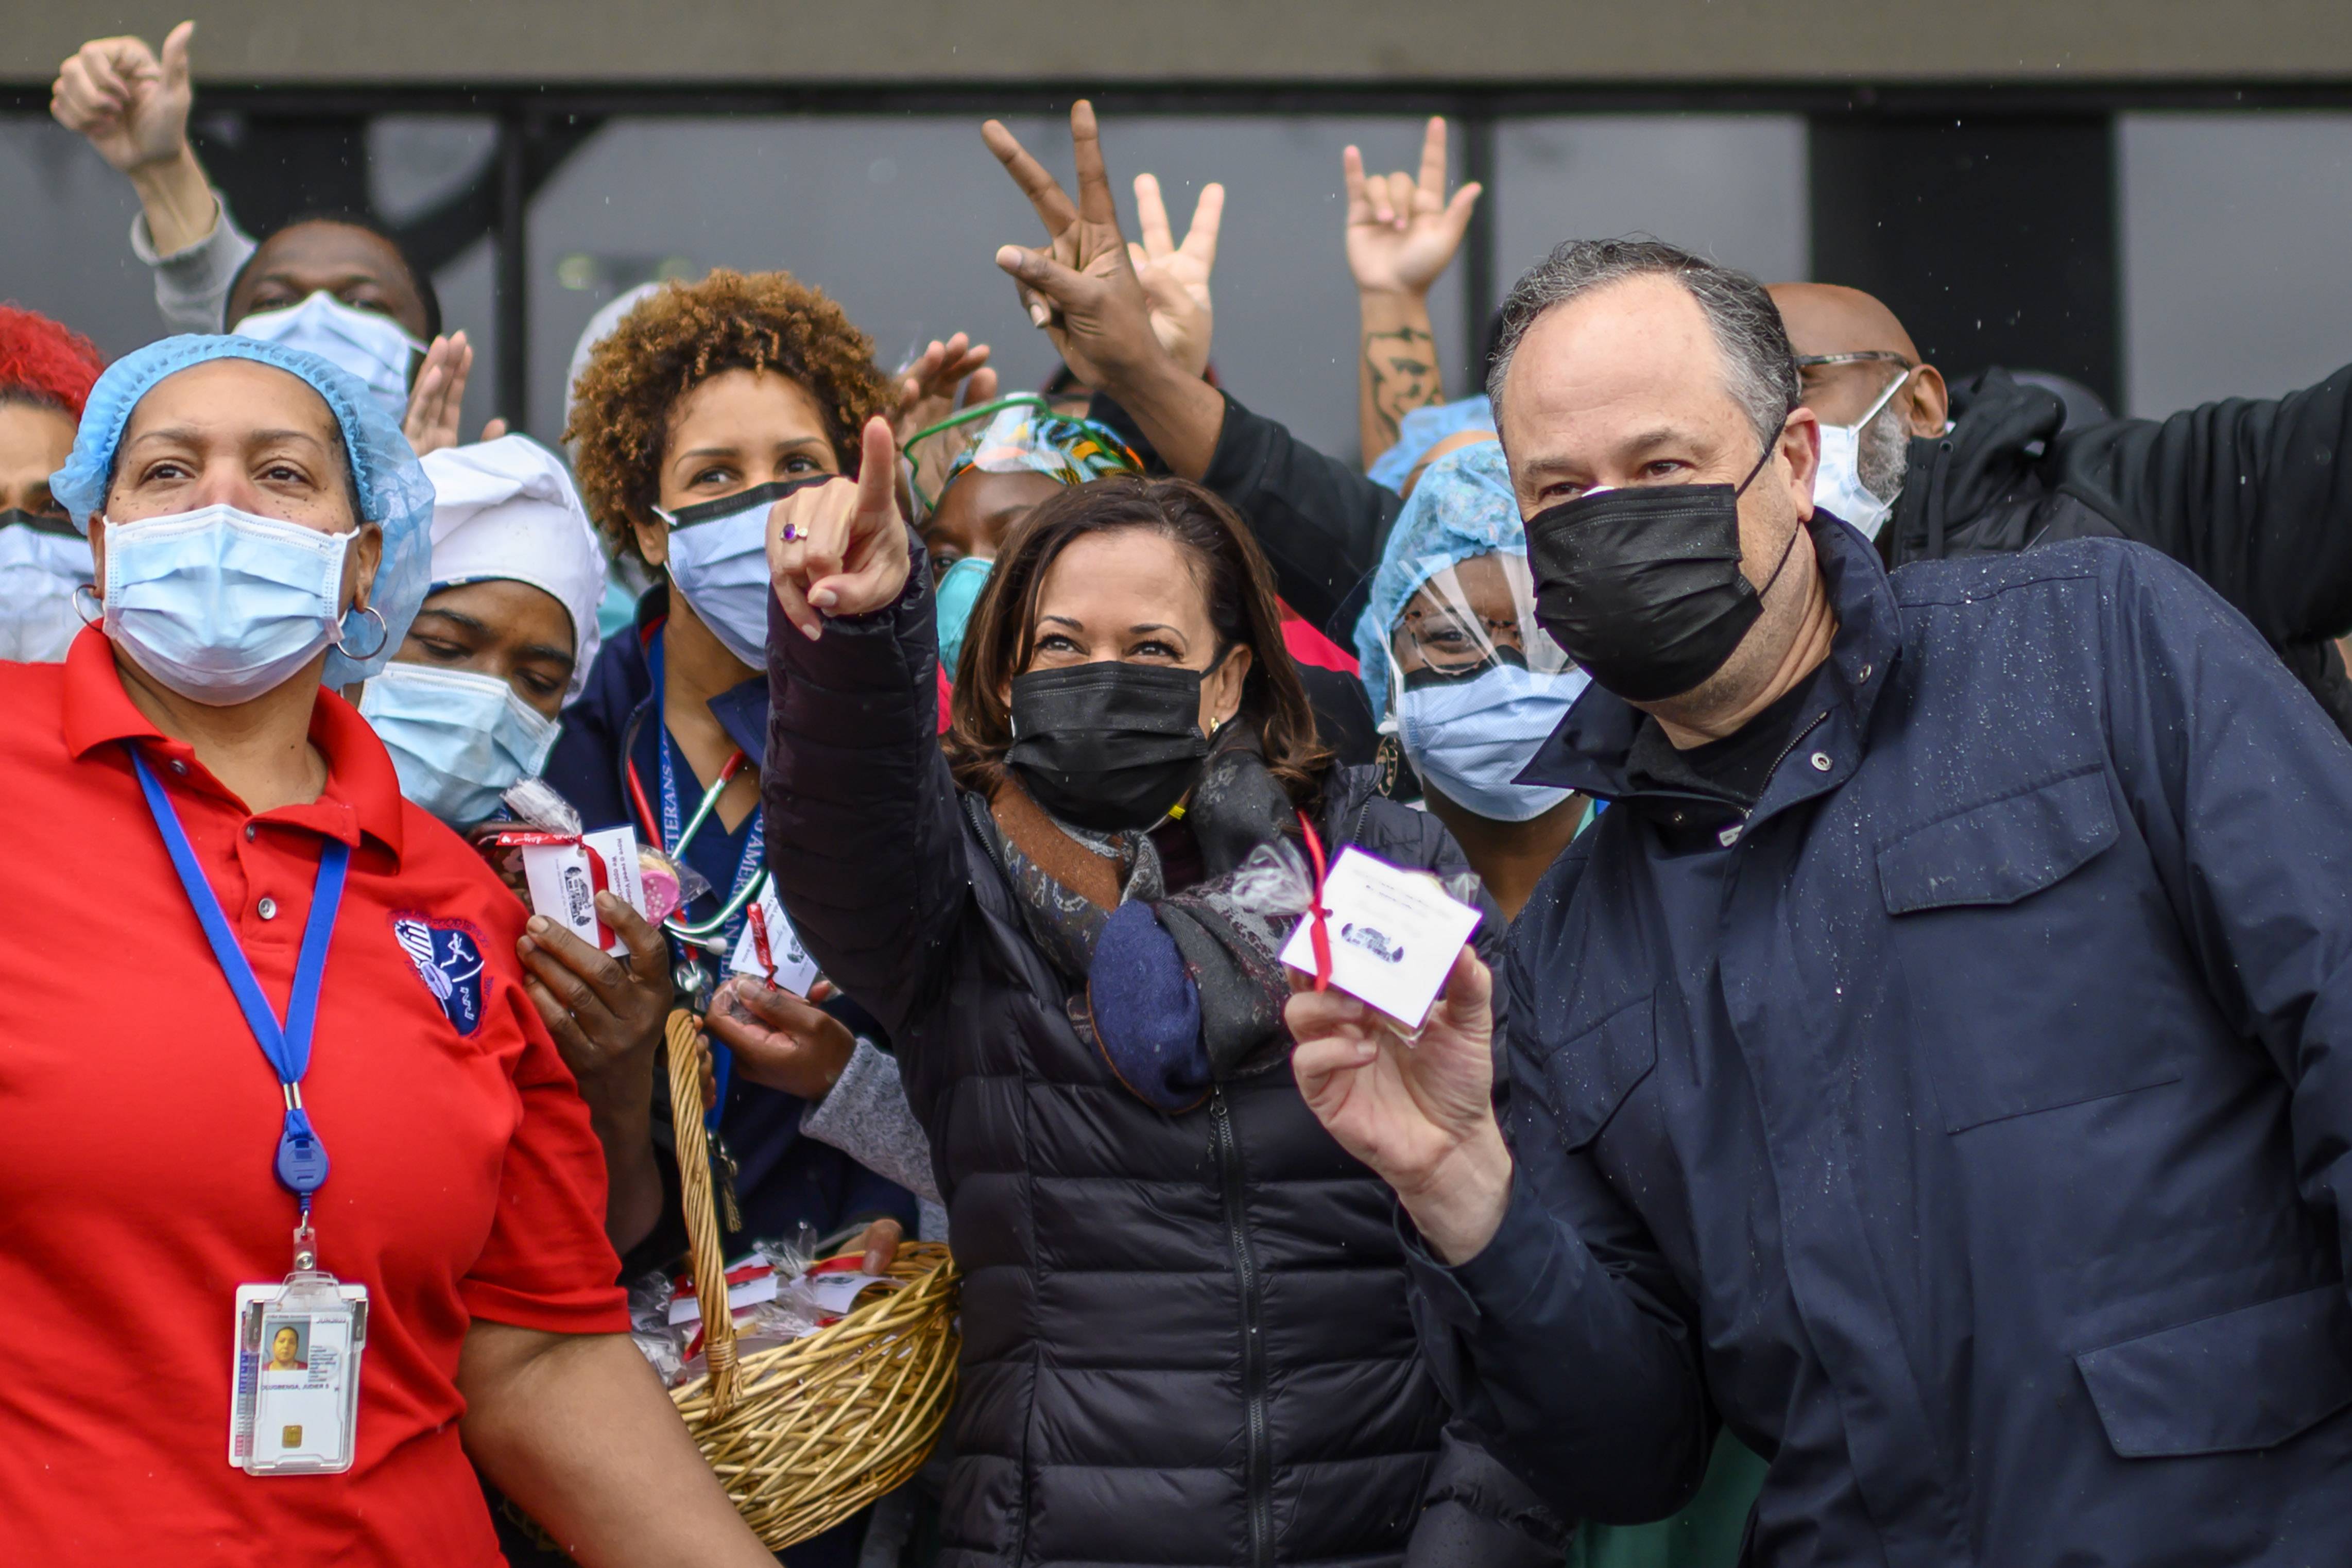 US Vice President Kamala Harris (C) and her husband,  Second Gentleman Doug Emhoff  (R), pose for a picture with healthcare workers at the Washington, DC, VA Center, a veterans hospital, as they delivered baskets of Valentine's cookies on February 13, 2021. (Photo by Eric BARADAT / AFP) (Photo by ERIC BARADAT/AFP via Getty Images)